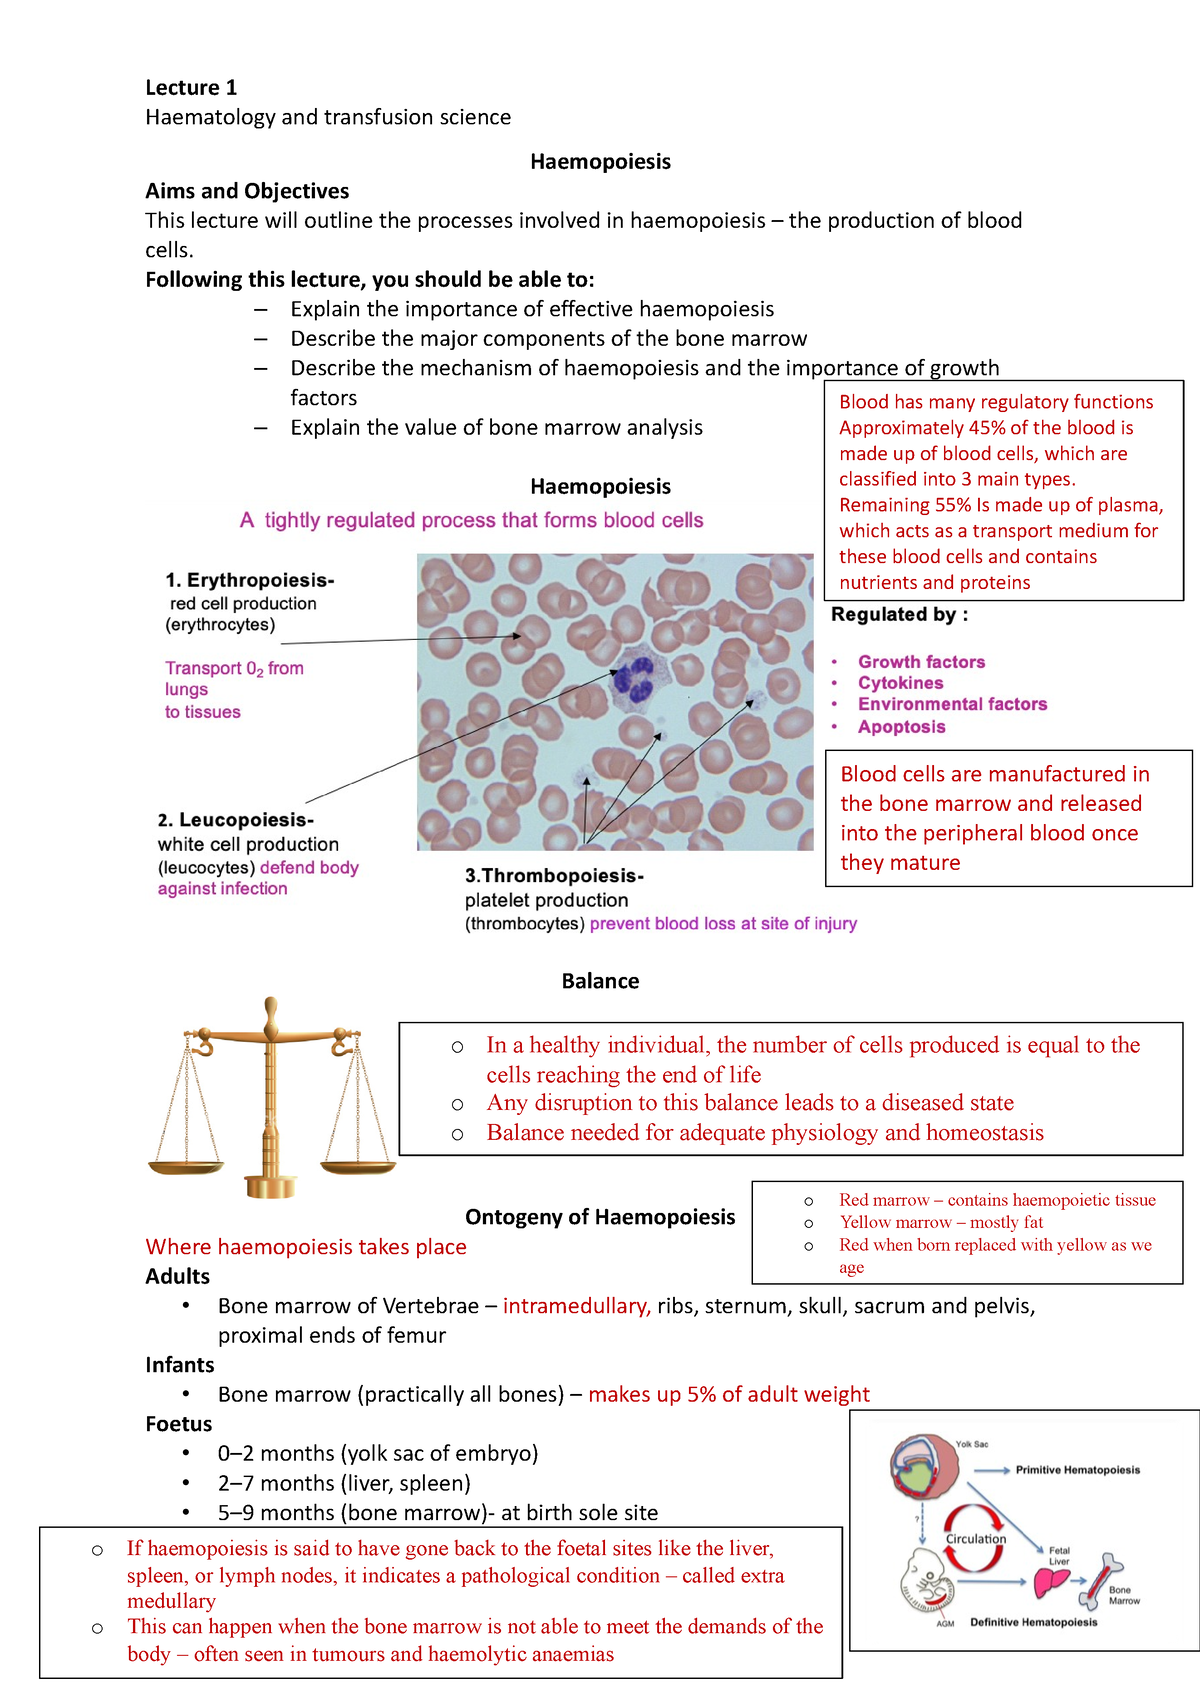 Lecture 1 Haemopoiesis Haematology And Transfusion Science Haemopoiesis Aims And Objectives 5327